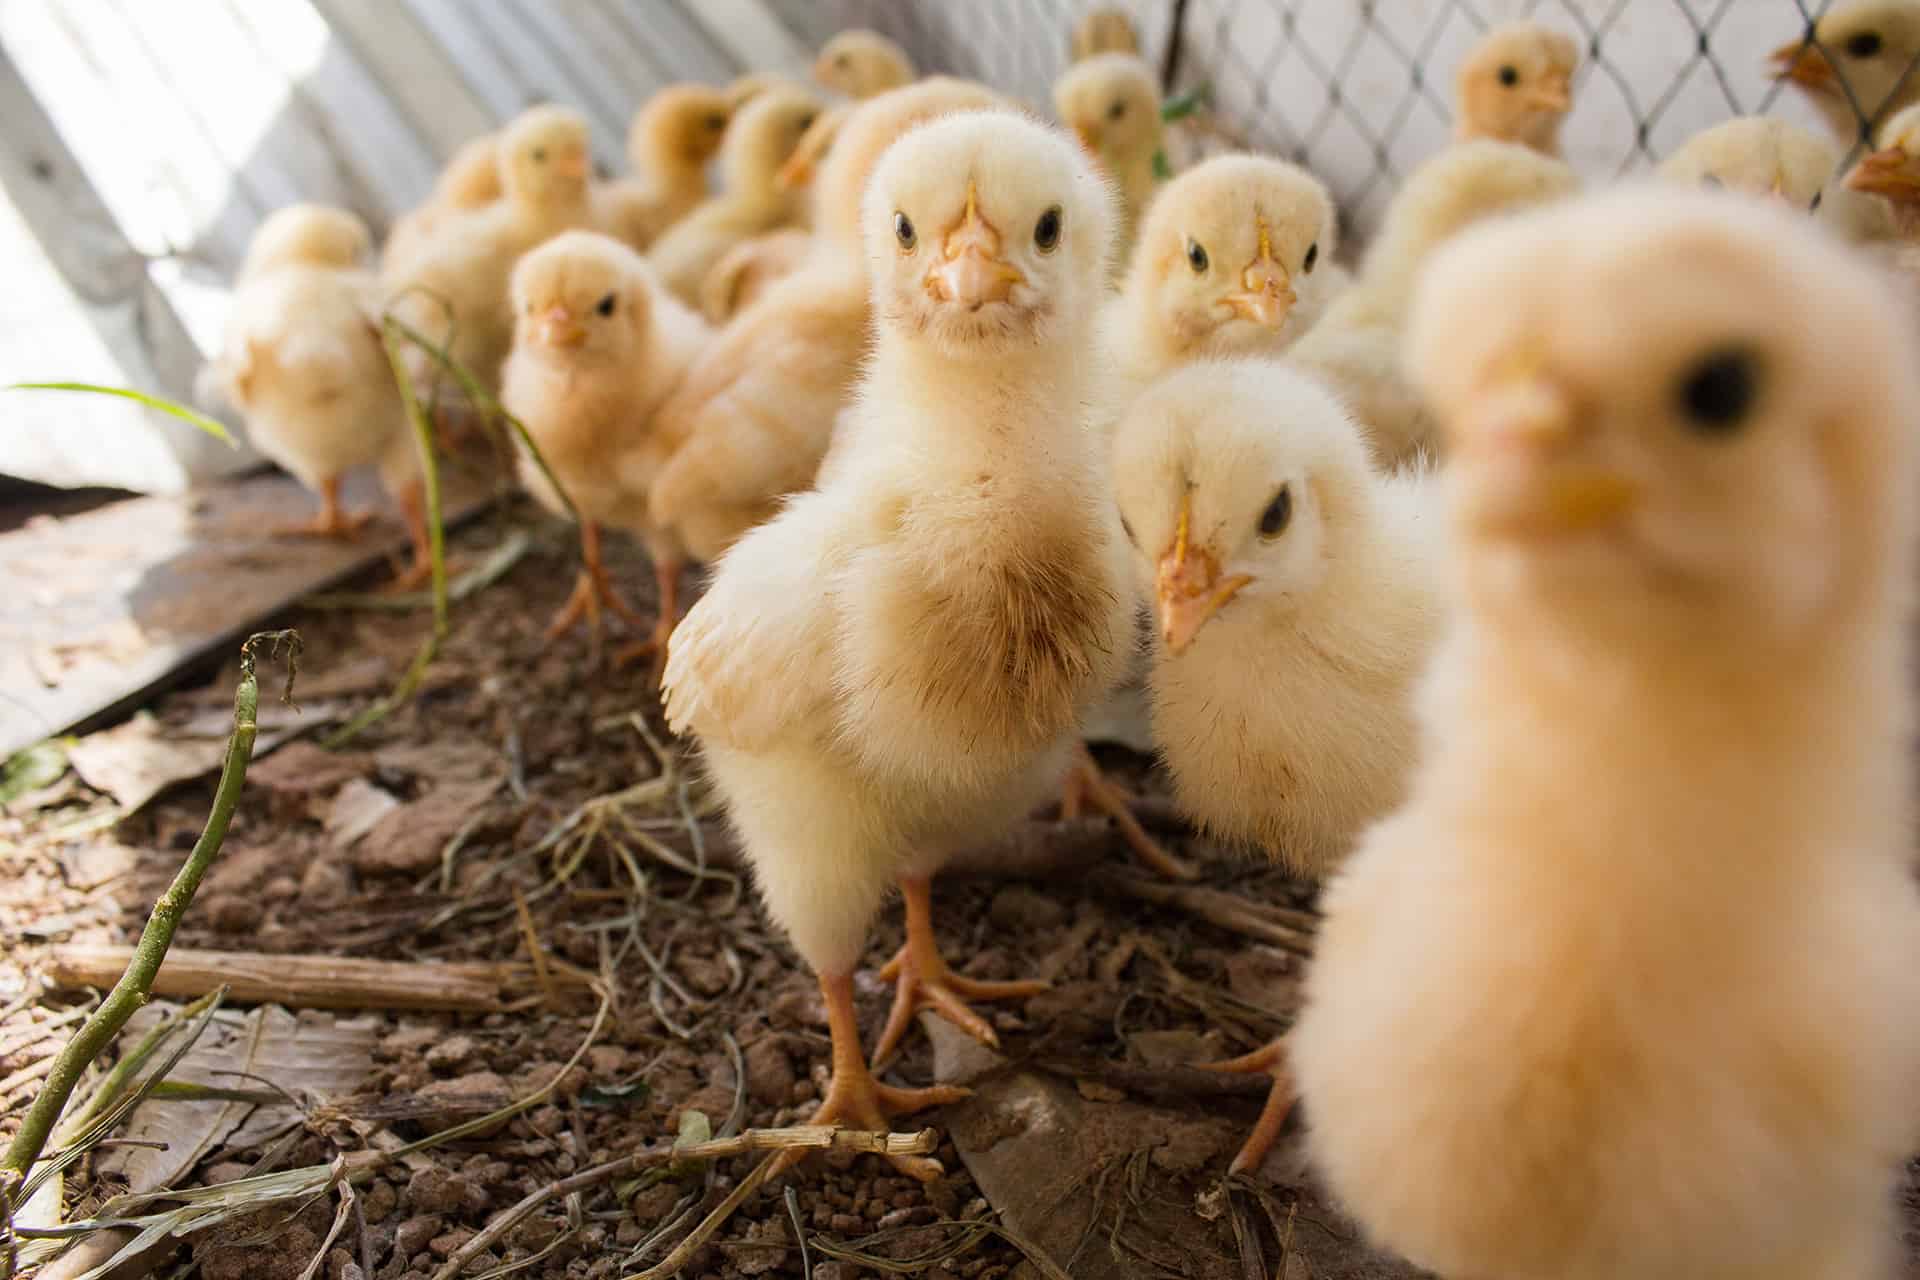 Baby chicks cluster together in an outdoor fenced area